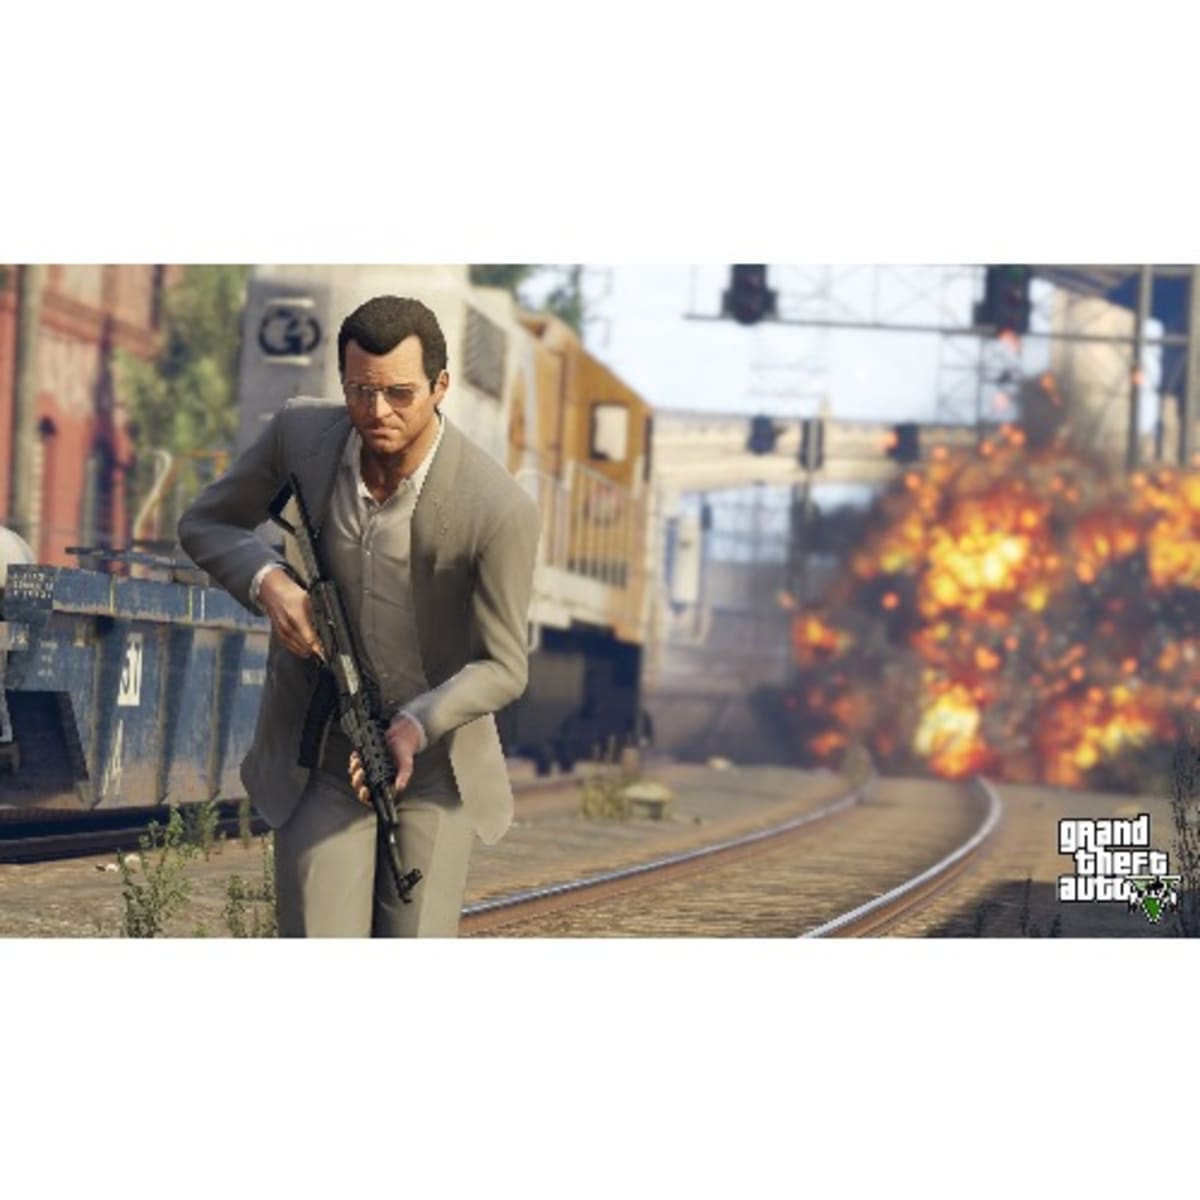 Grand Theft Auto V PC Games in Nigeria for sale ▷ Prices on